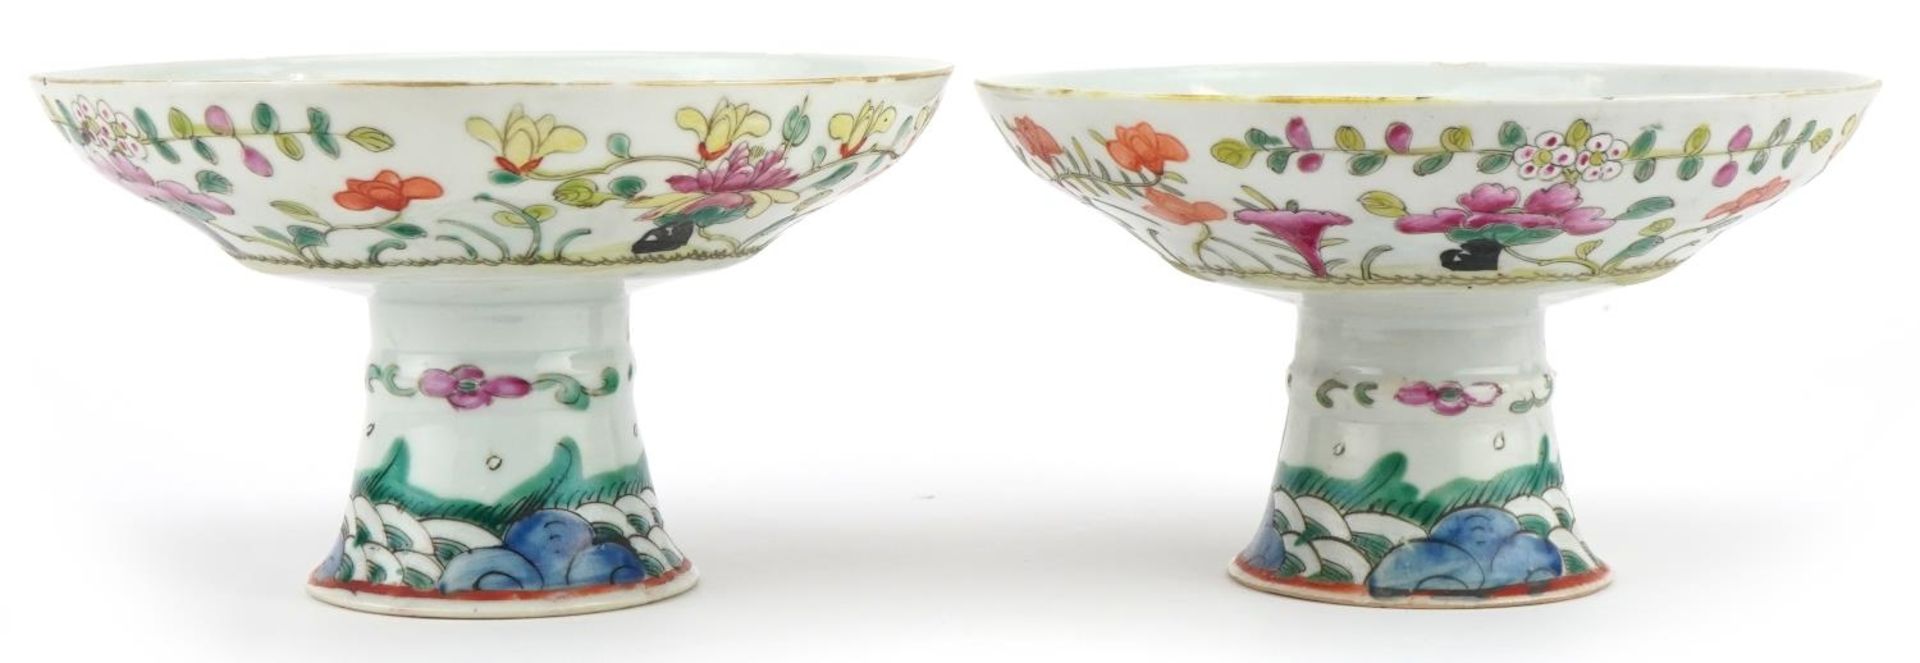 Pair of Chinese porcelain stem bowls hand painted in the famille rose palette with flowers, each 9.